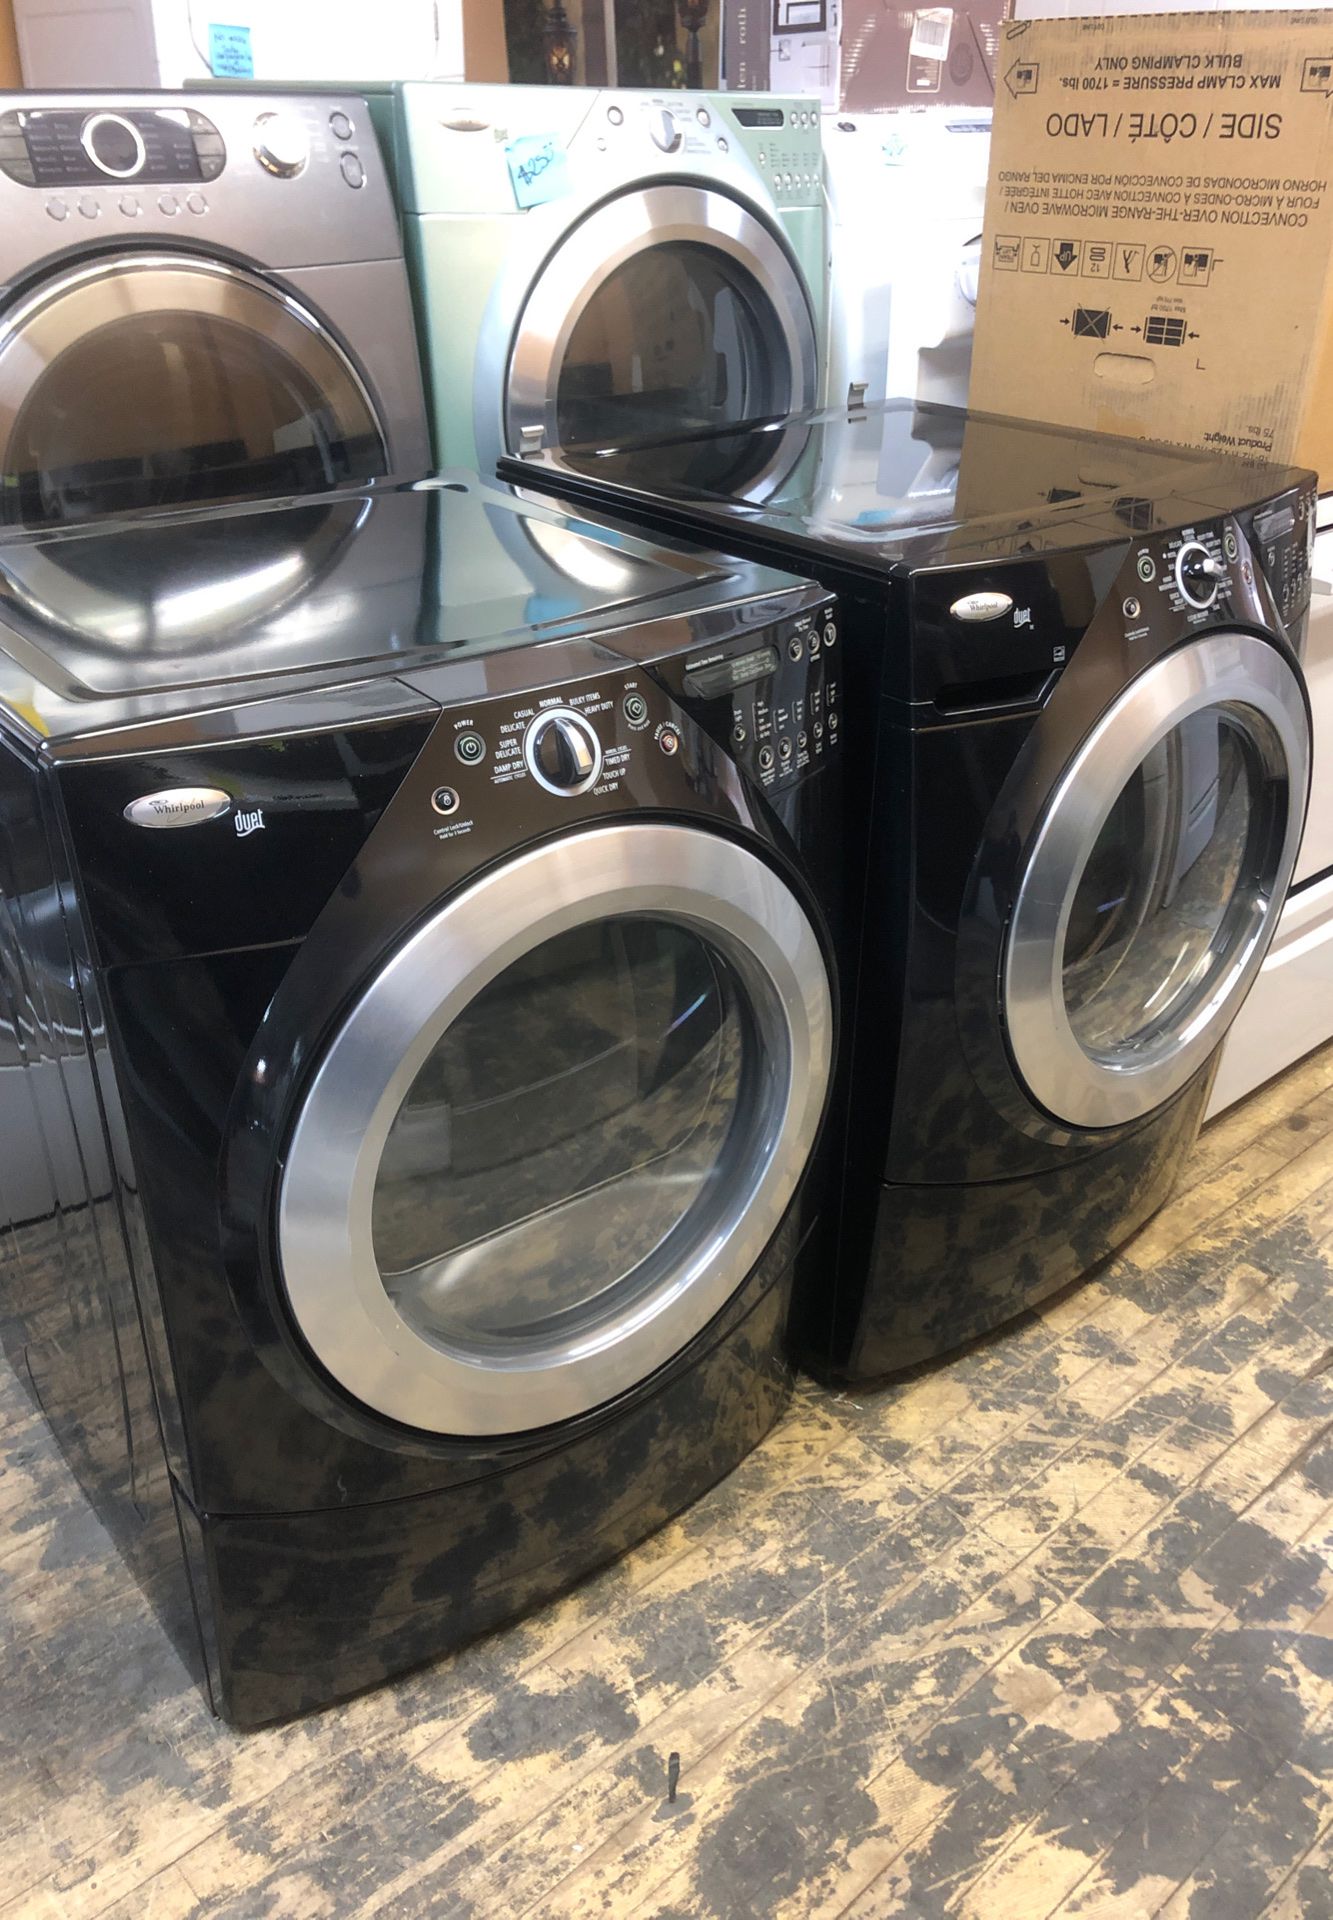 Whirlpool duet washer and dryer black set